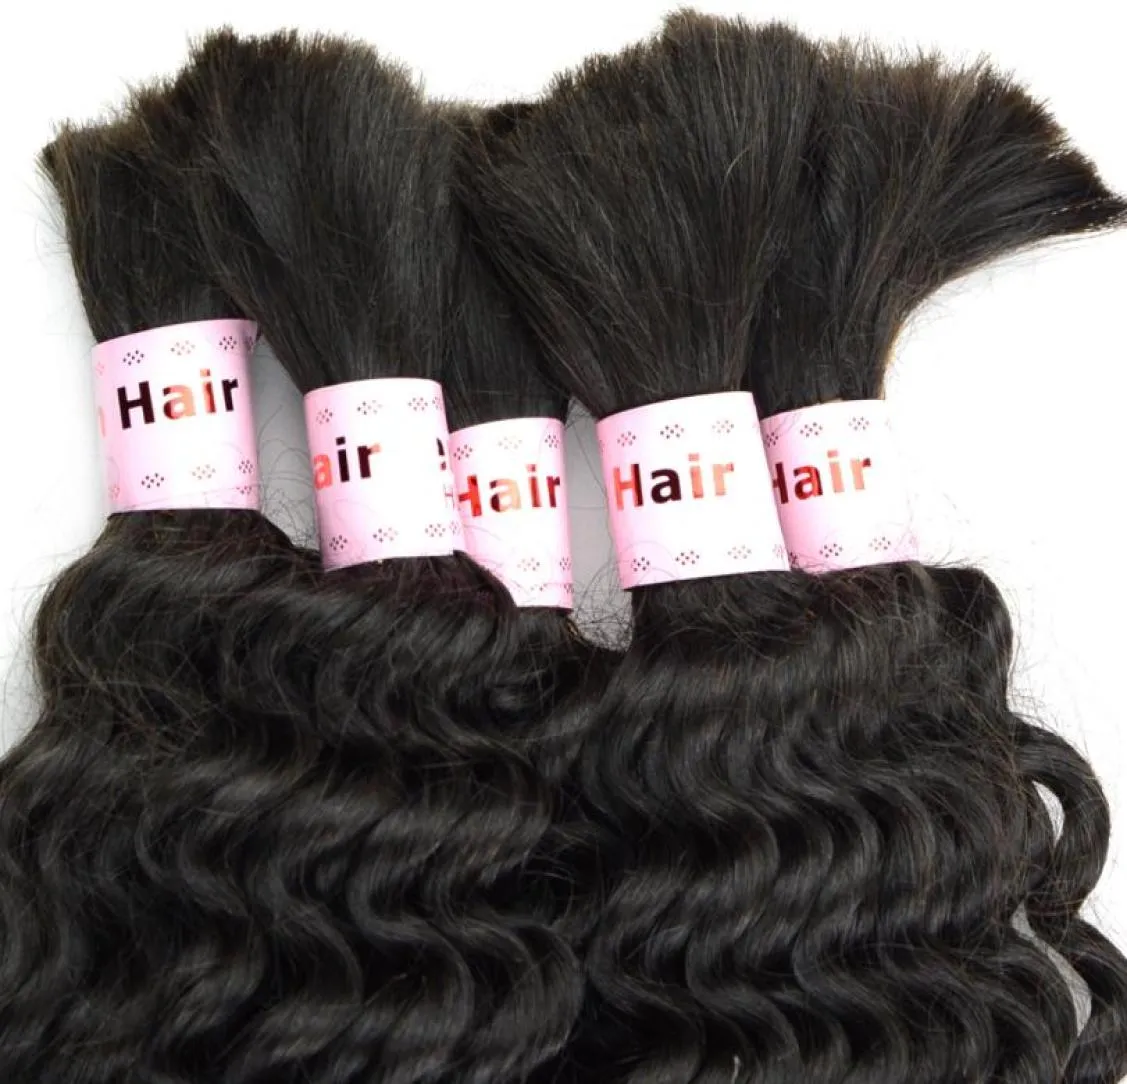 Curly Raw Human Hair Bulk Extensions Mix Length 34pcs 12inch28inch Brazilian Braids Hair Bundle Deep Wave Dyeable for Full34240532727779